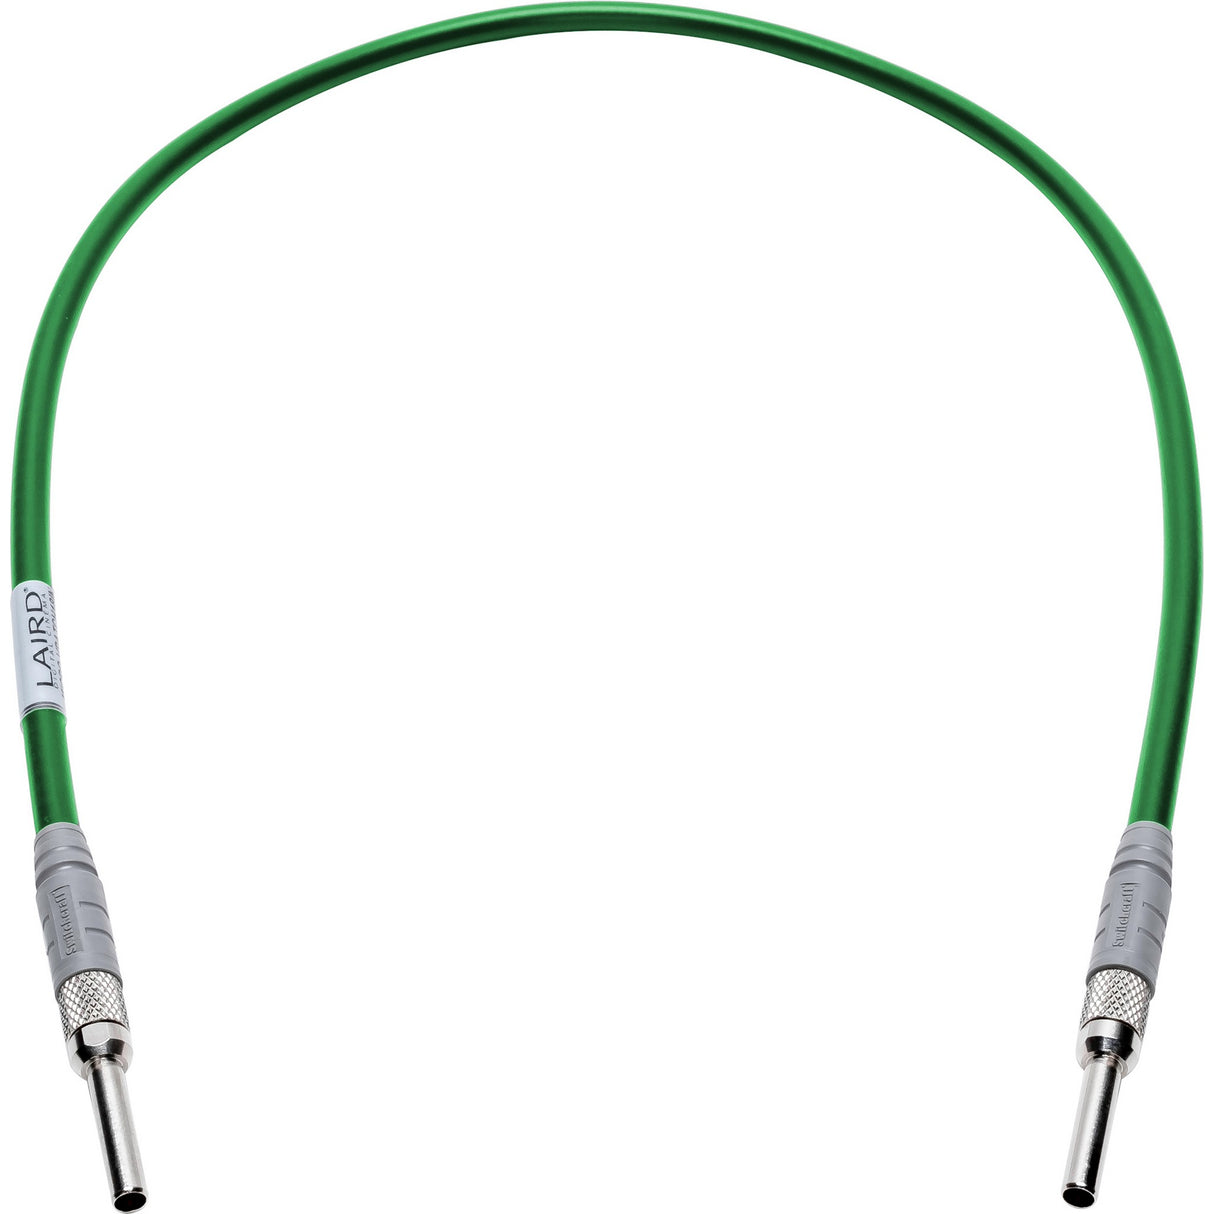 Laird MICRO-VPATCH-001GN 12G-SDI Micro Video Patch Cable, Military Green, 1-Foot